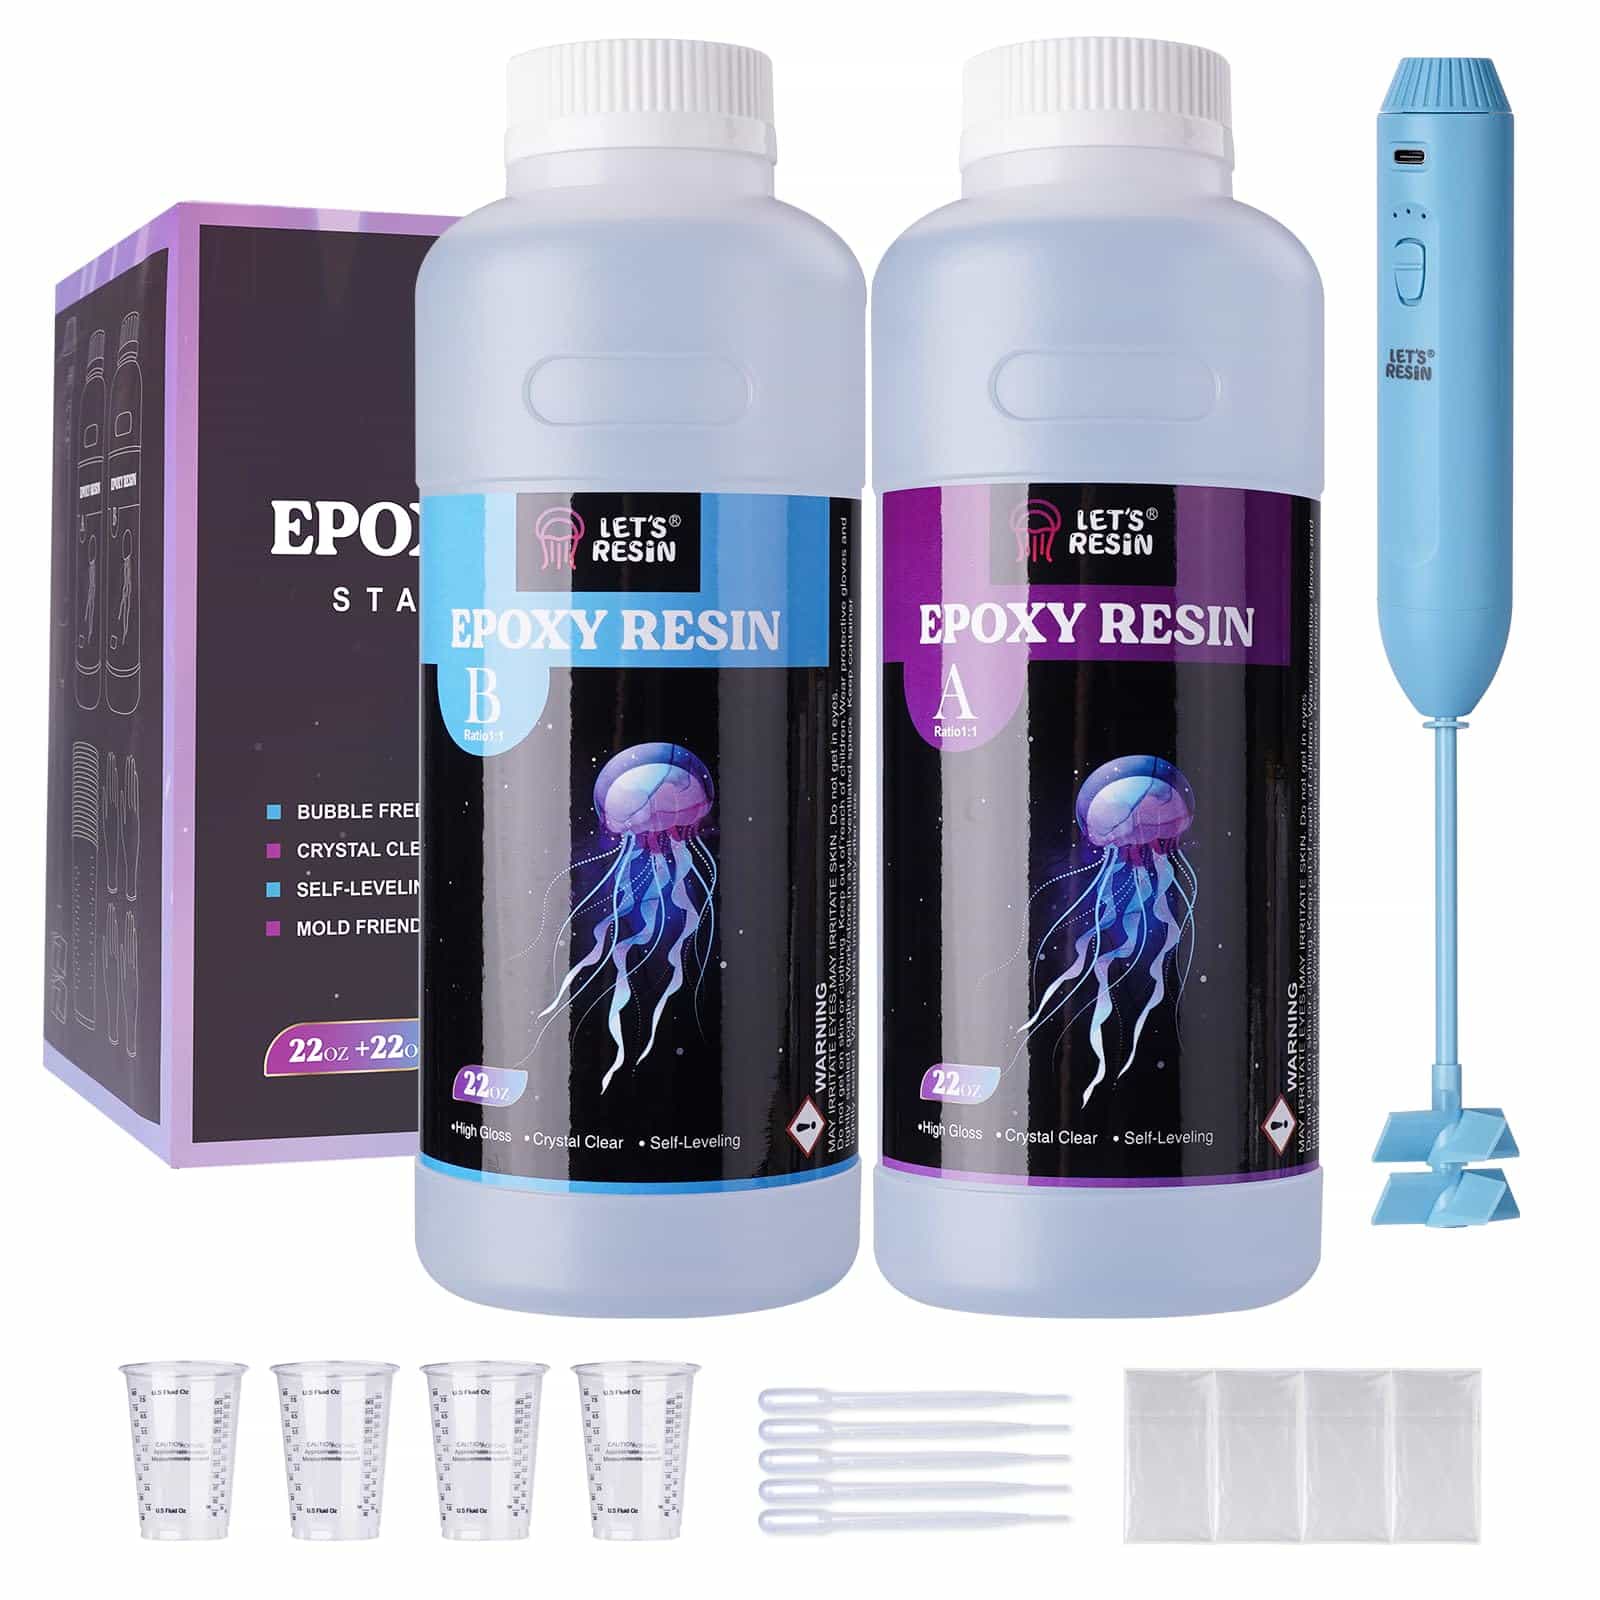 LET'S RESIN Epoxy Resin Kit for Beginners, 44oz Crystal Clear Epoxy Resin  with Epoxy Mixer, Bubble Free & Fast Curing 2 Part Resin Epoxy, Casting